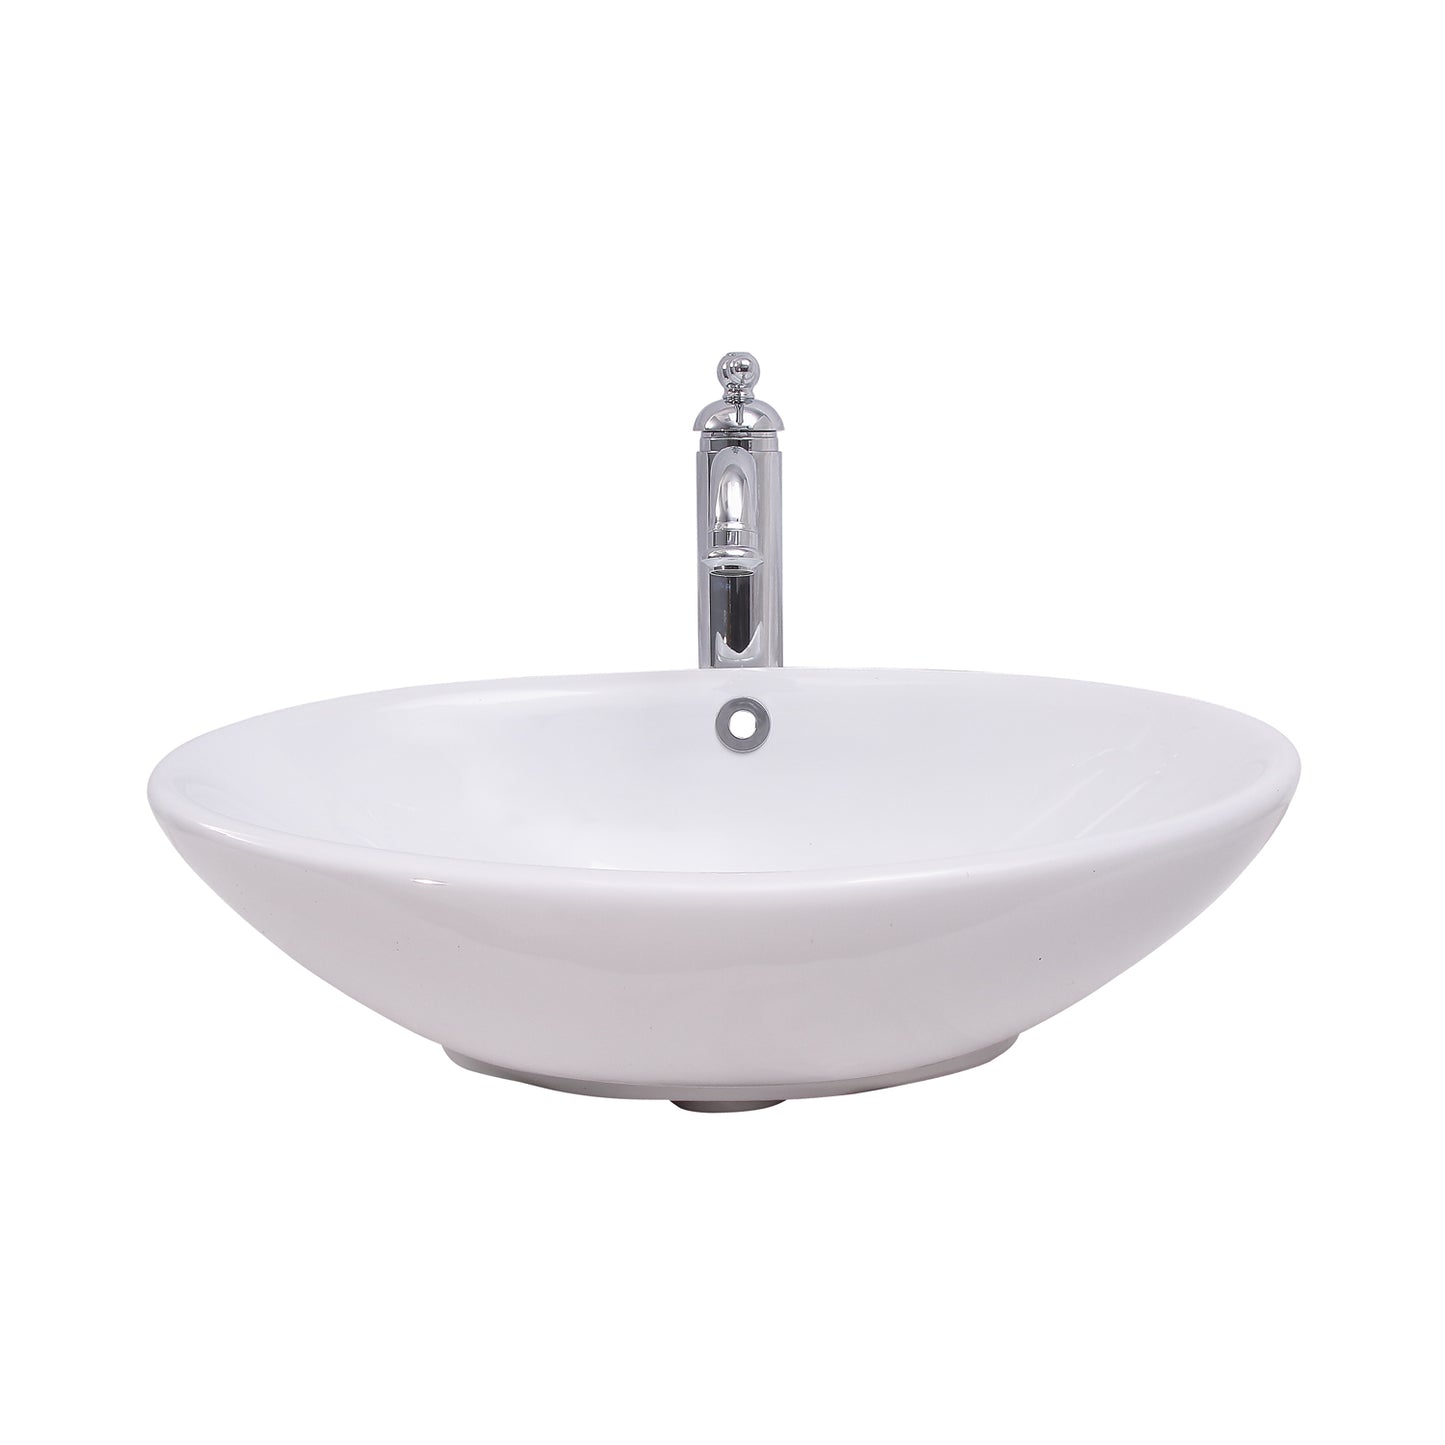 Declan 20" Wall Hung Bathroom Sink with 1 Faucet Hole and Overflow White